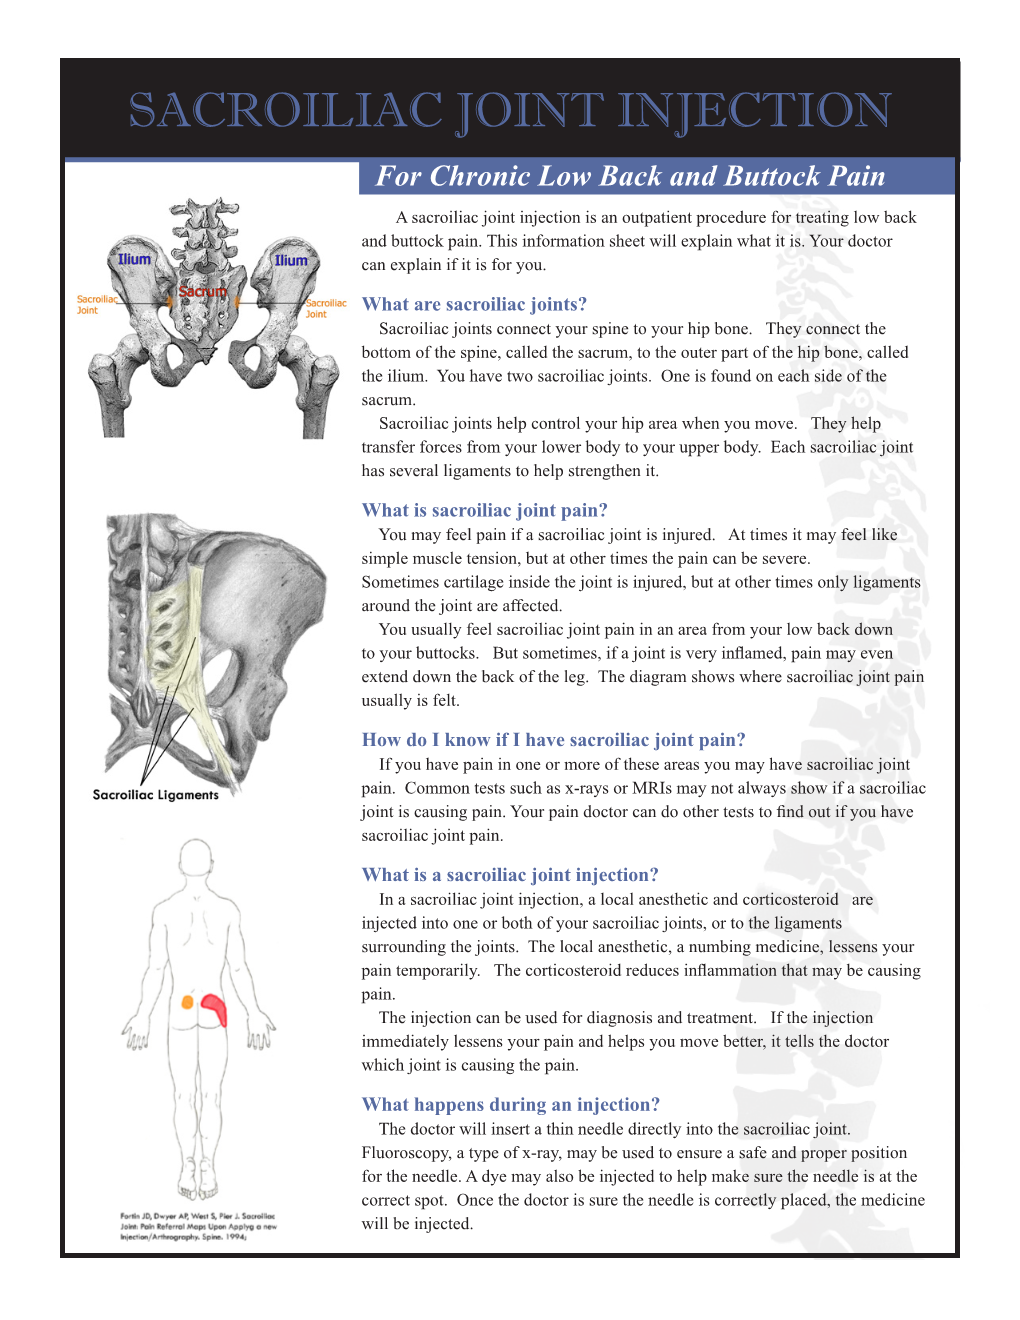 SACROILIAC JOINT INJECTION for Chronic Low Back and Buttock Pain a Sacroiliac Joint Injection Is an Outpatient Procedure for Treating Low Back and Buttock Pain